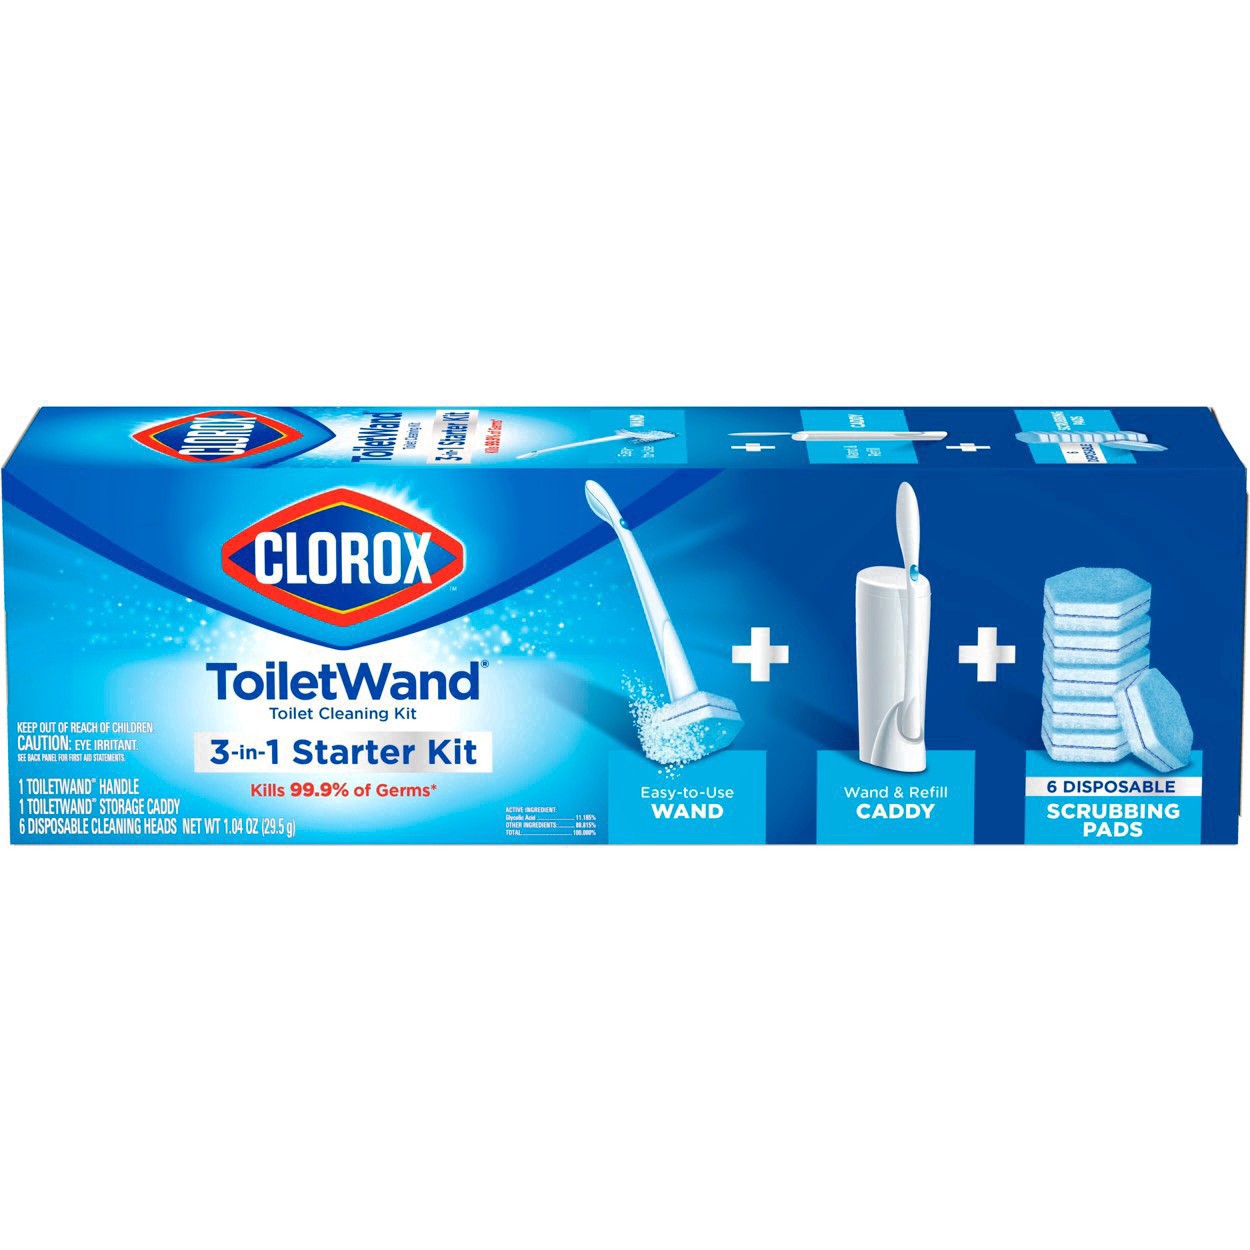 slide 74 of 176, Clorox Toilet Wand 3-in-1 Starter Toliet Cleaning Kit, 1 ct